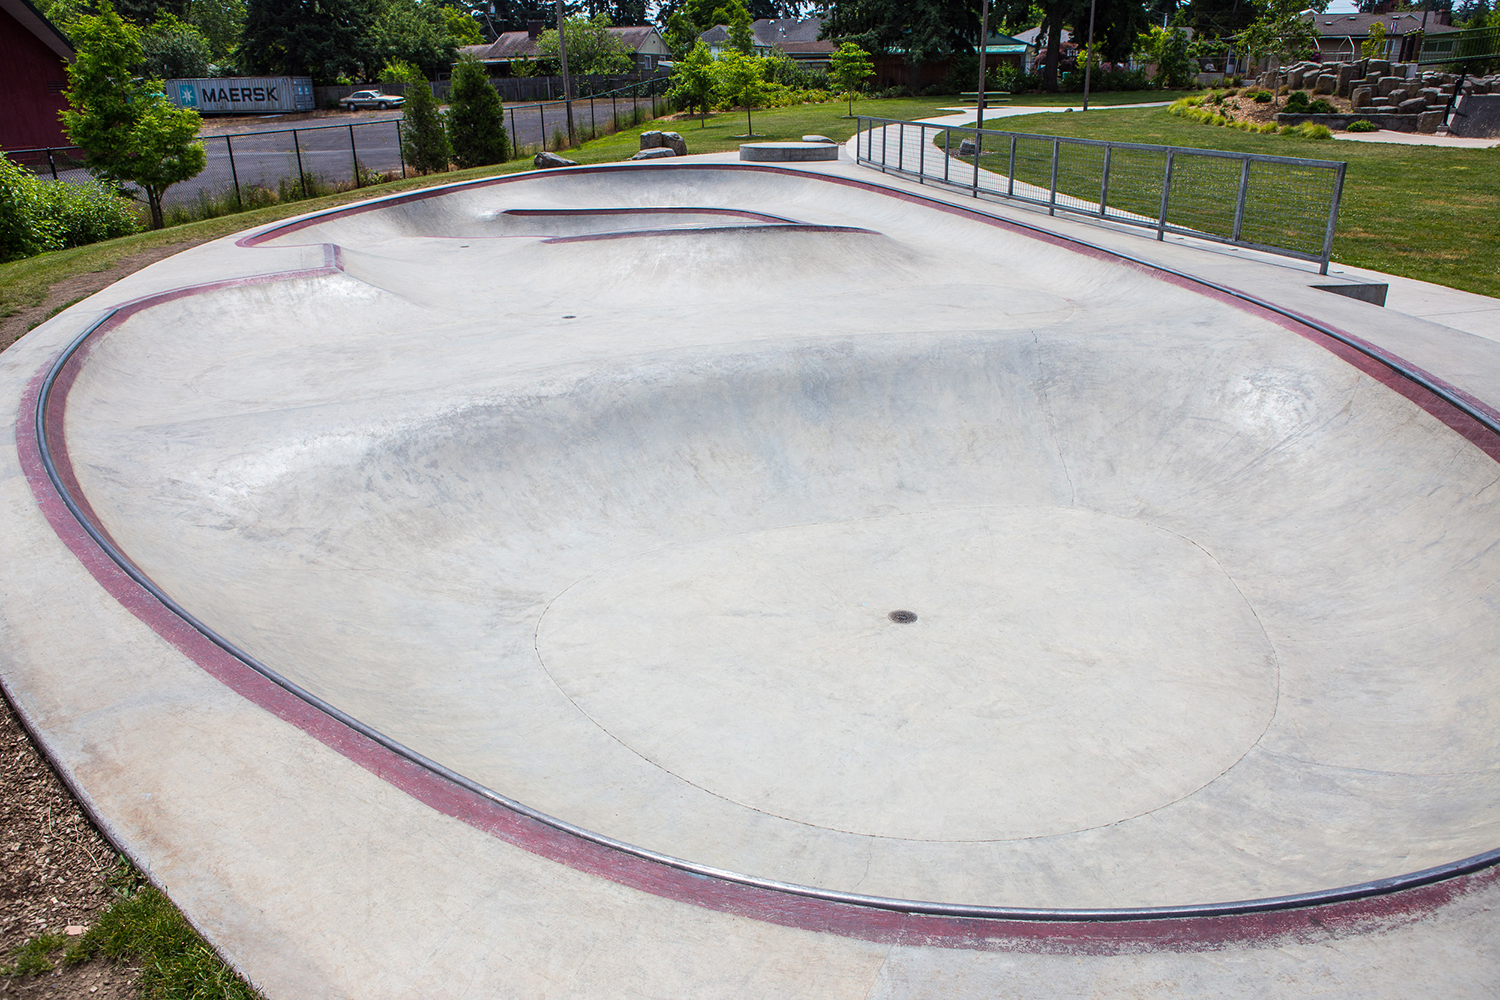  Portland’s Khunamokwst Park features this pint sized skate spot which is suitably designed towards adolescents and beginning skateboarders. 